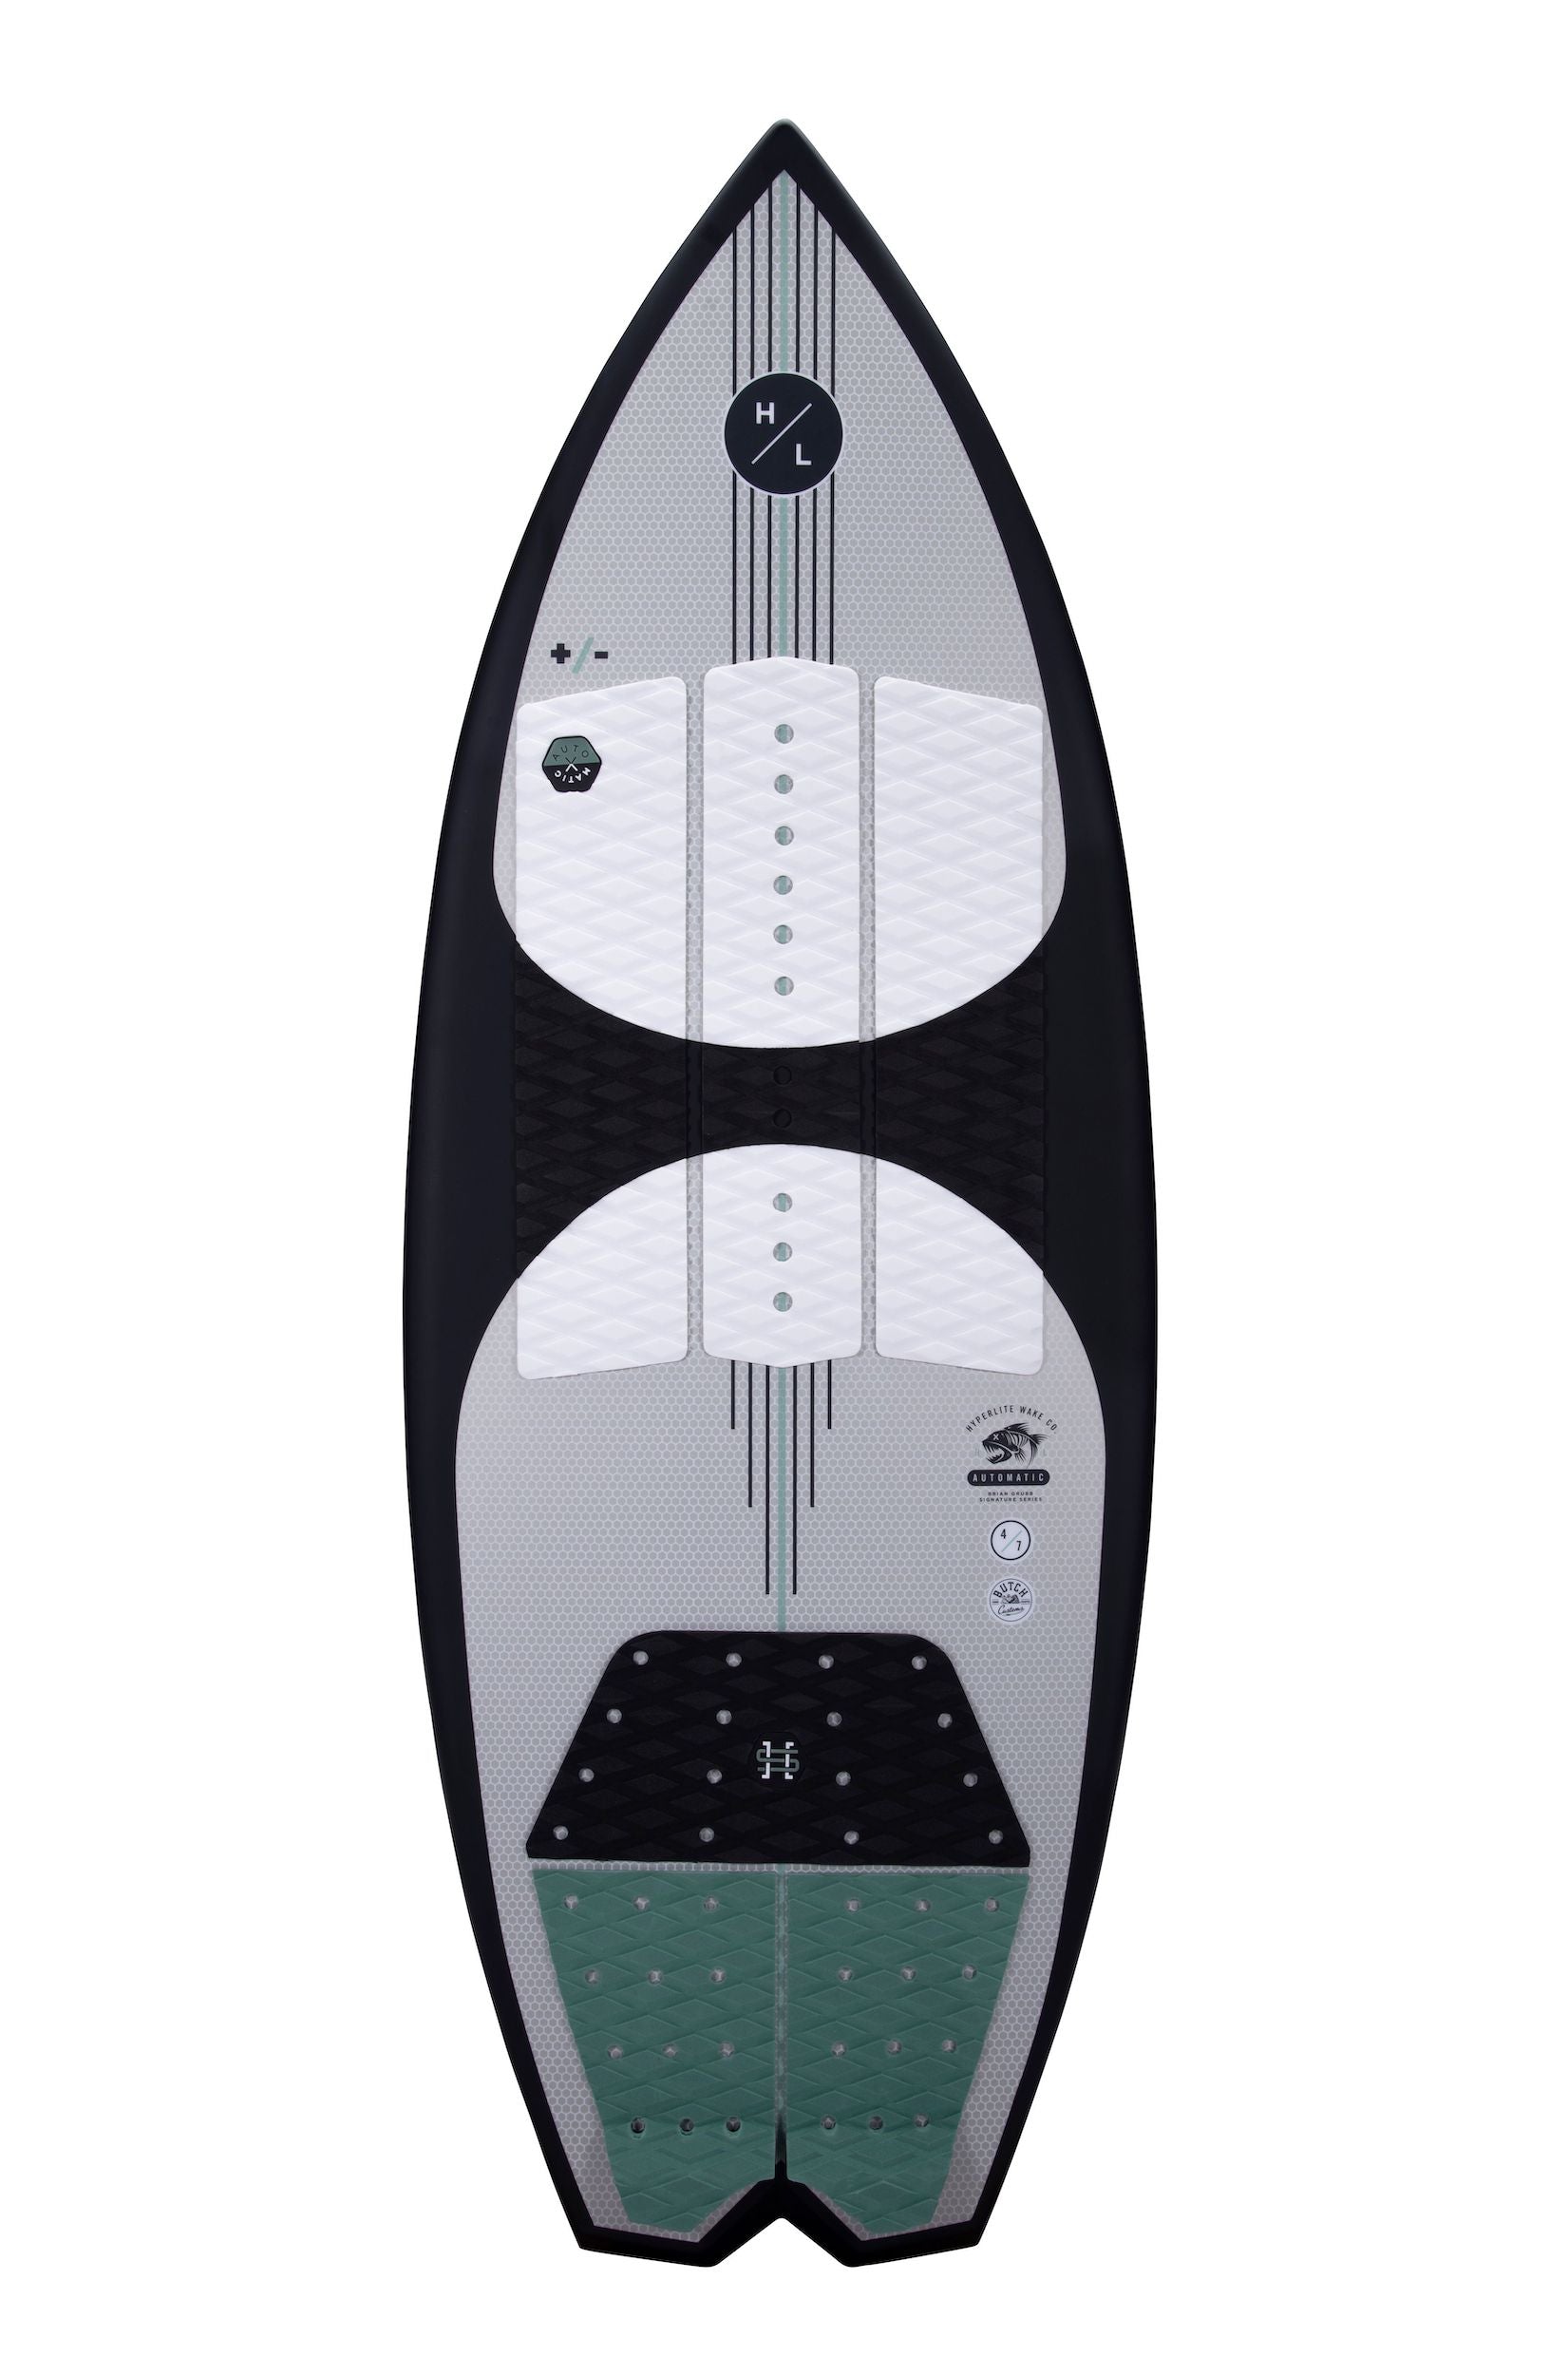 A Hyperlite 2023 Automatic Wakesurf Board with a black and green design featuring DuraShell Construction.